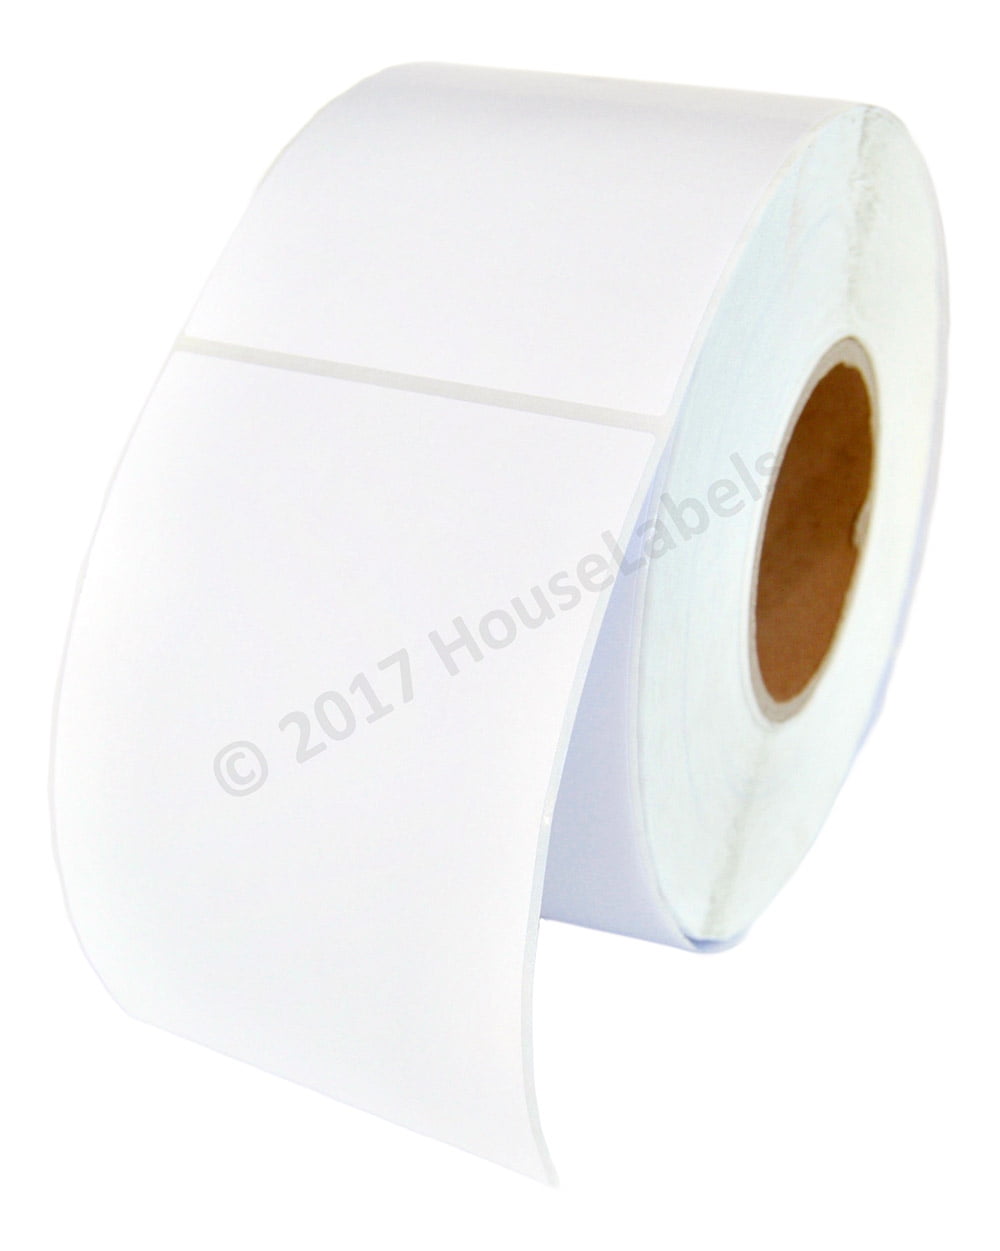 4x6 Direct Thermal Labels Rolls 100 250 1000 for Eltron Zebra 2844 450 Shipping 